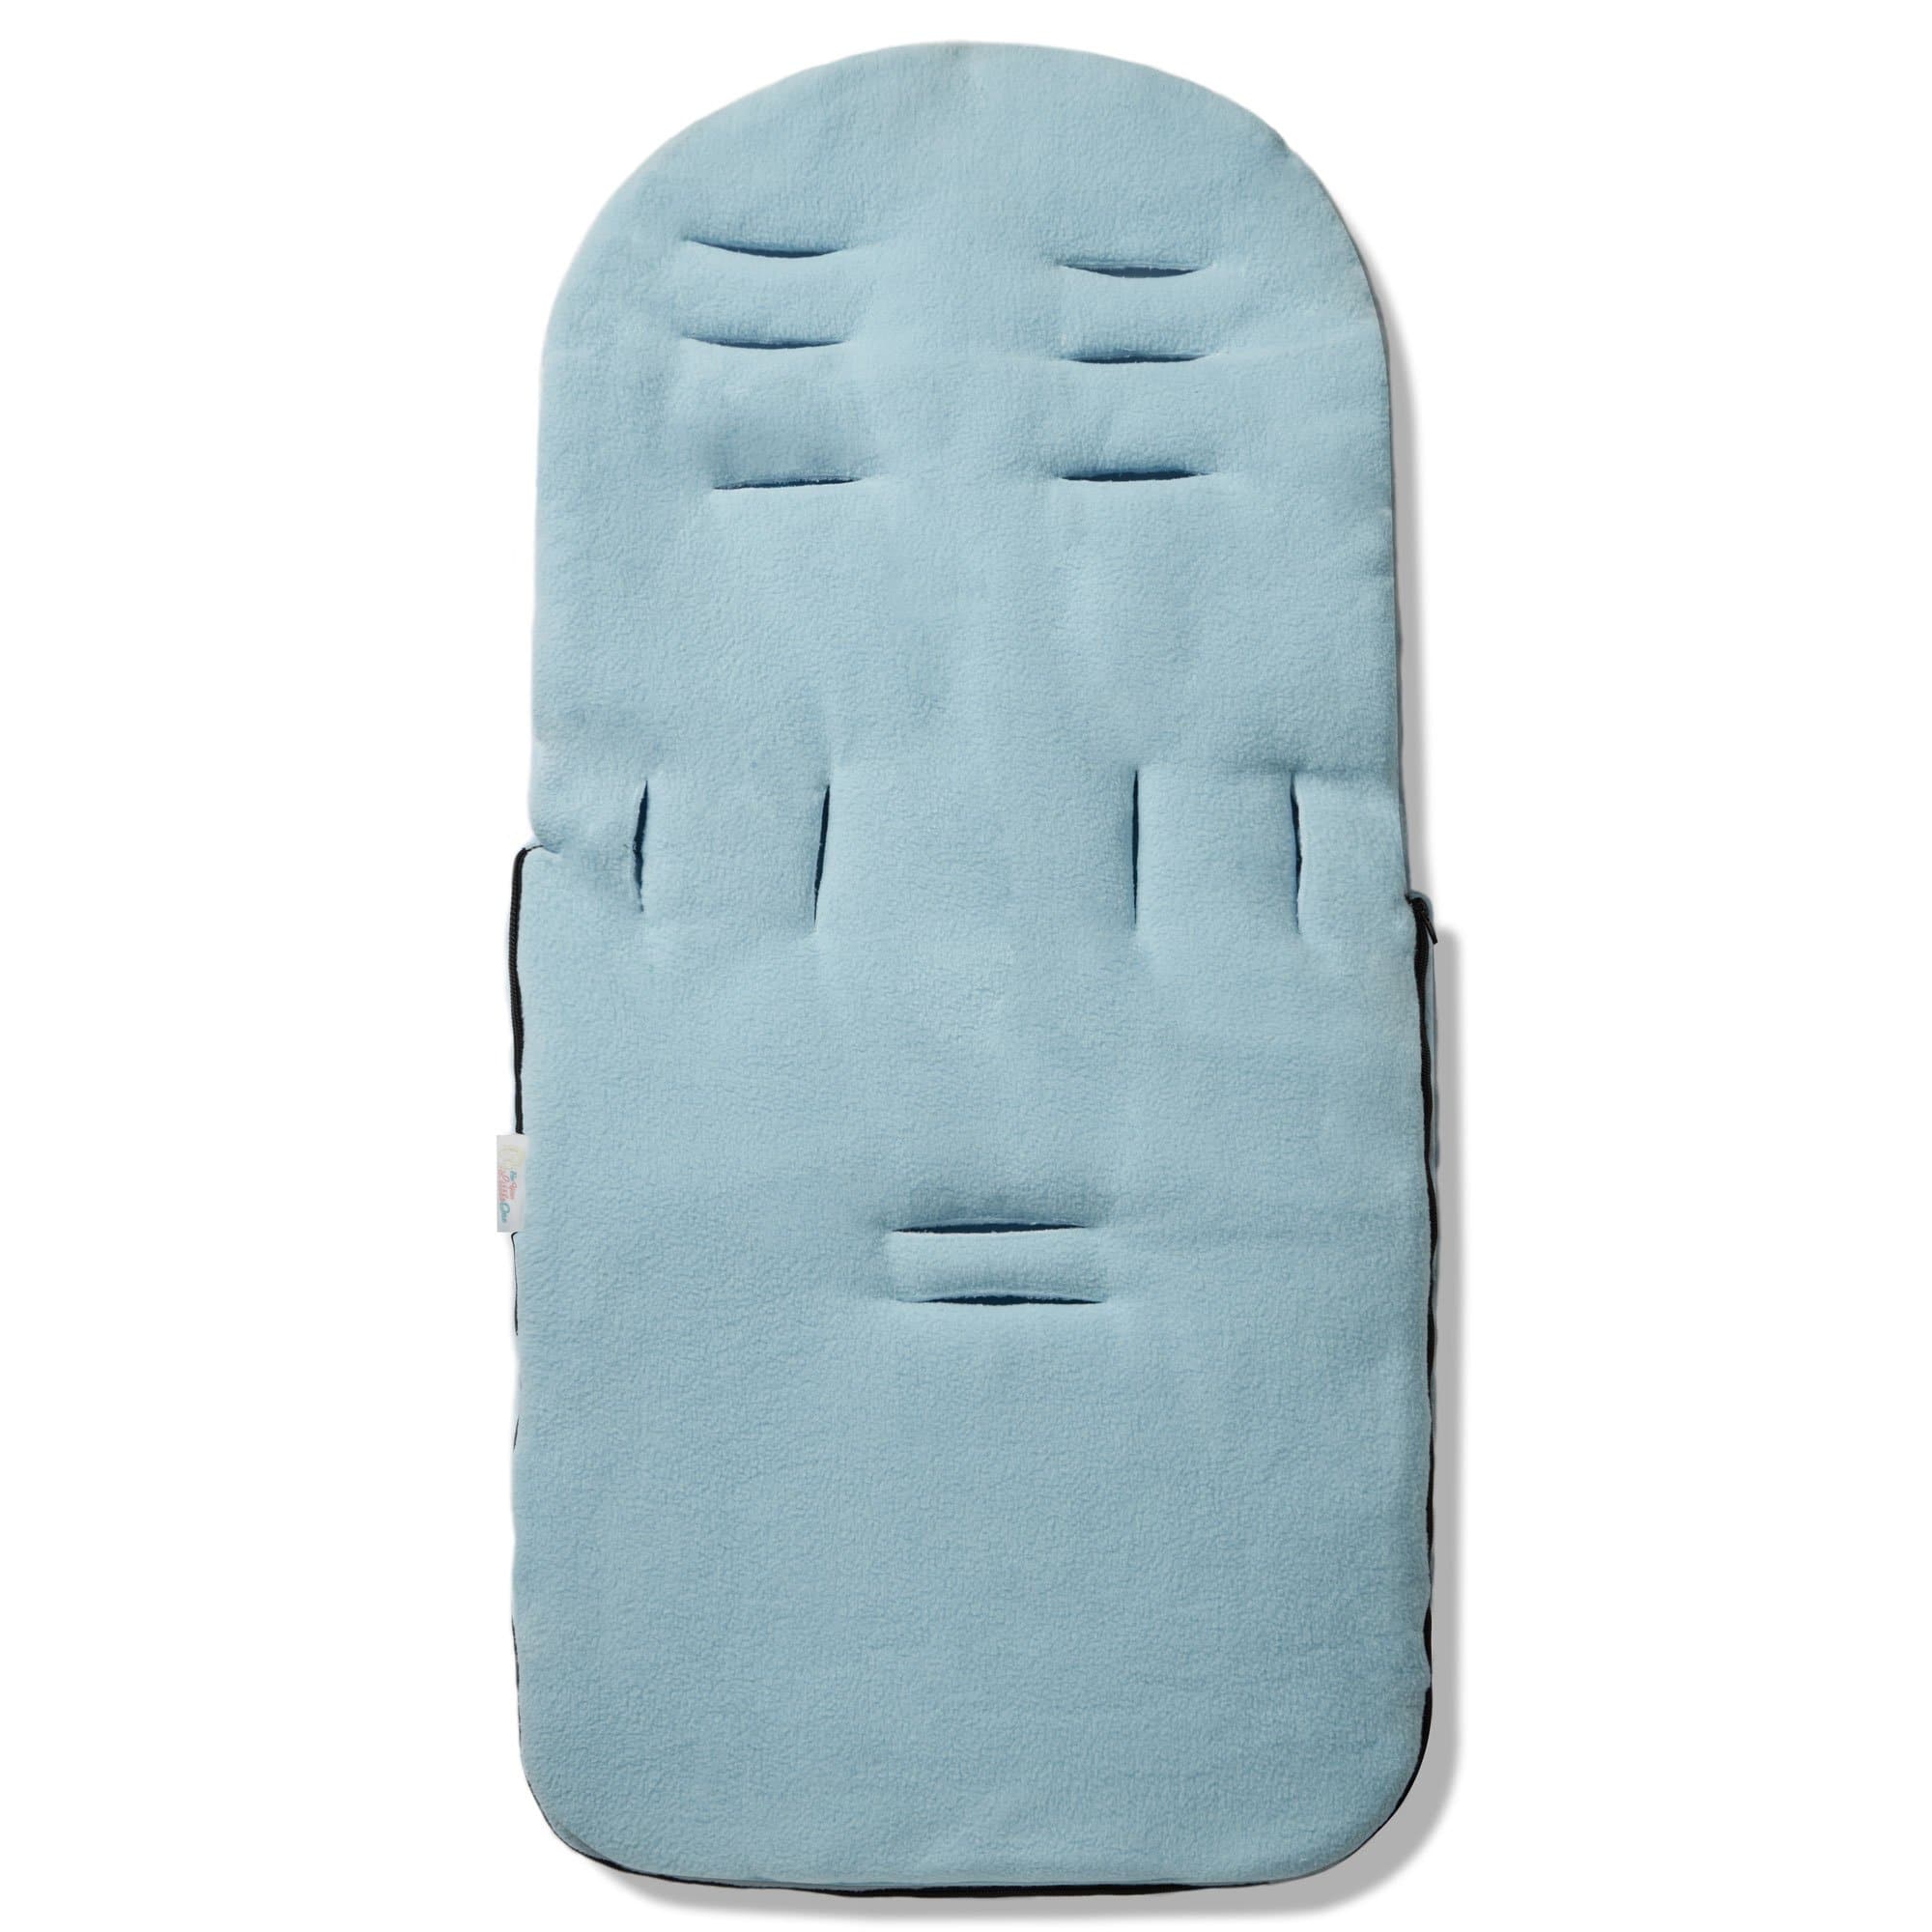 Dimple Footmuff / Cosy Toes Compatible with Baby Trend - For Your Little One